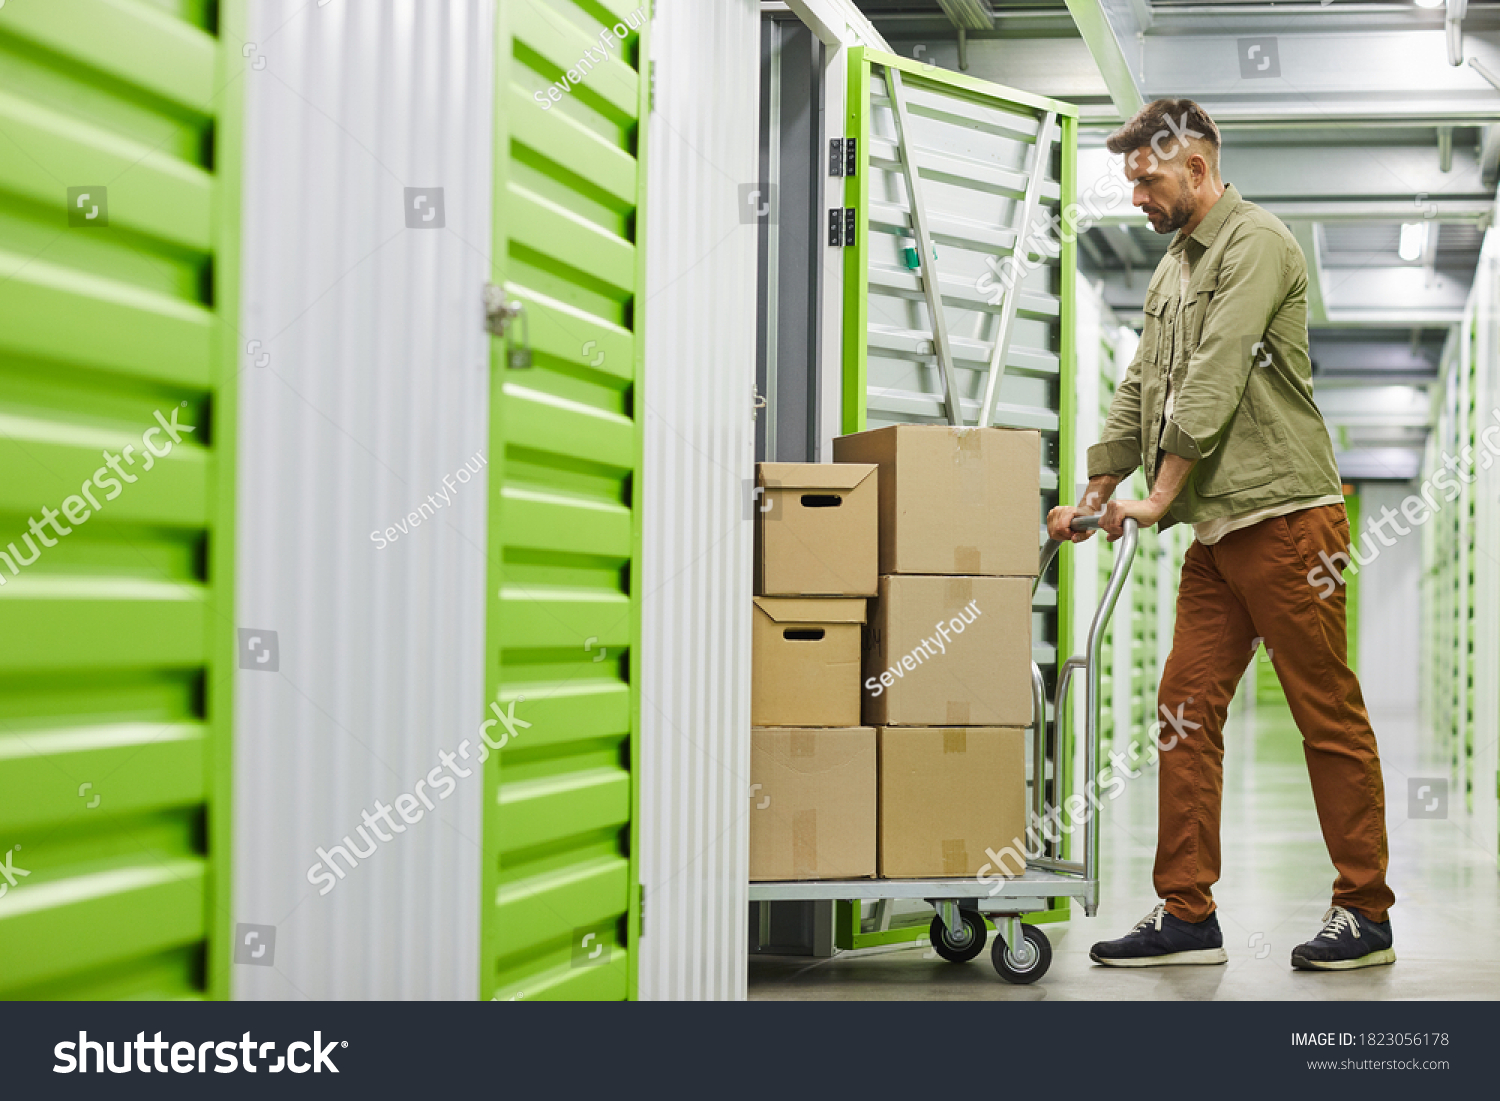 Full length side view at handsome bearded man loading cart with cardboard boxes into self storage unit, copy space #1823056178